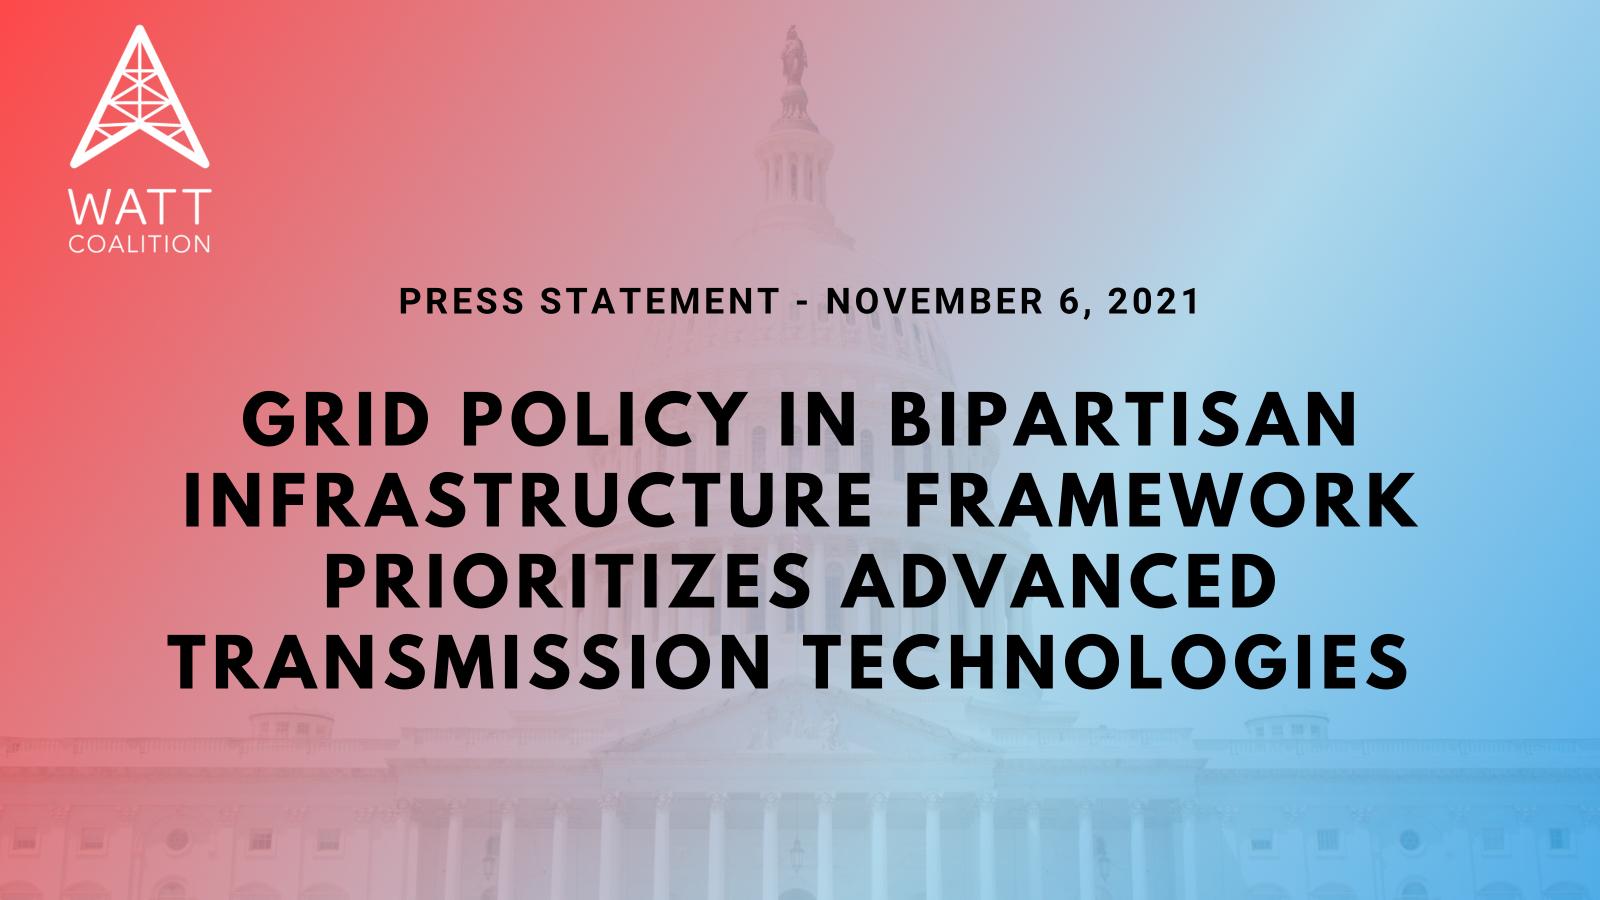 Product Grid Policy in Bipartisan Infrastructure Framework Prioritizes Advanced Transmission Technologies  – WATT image